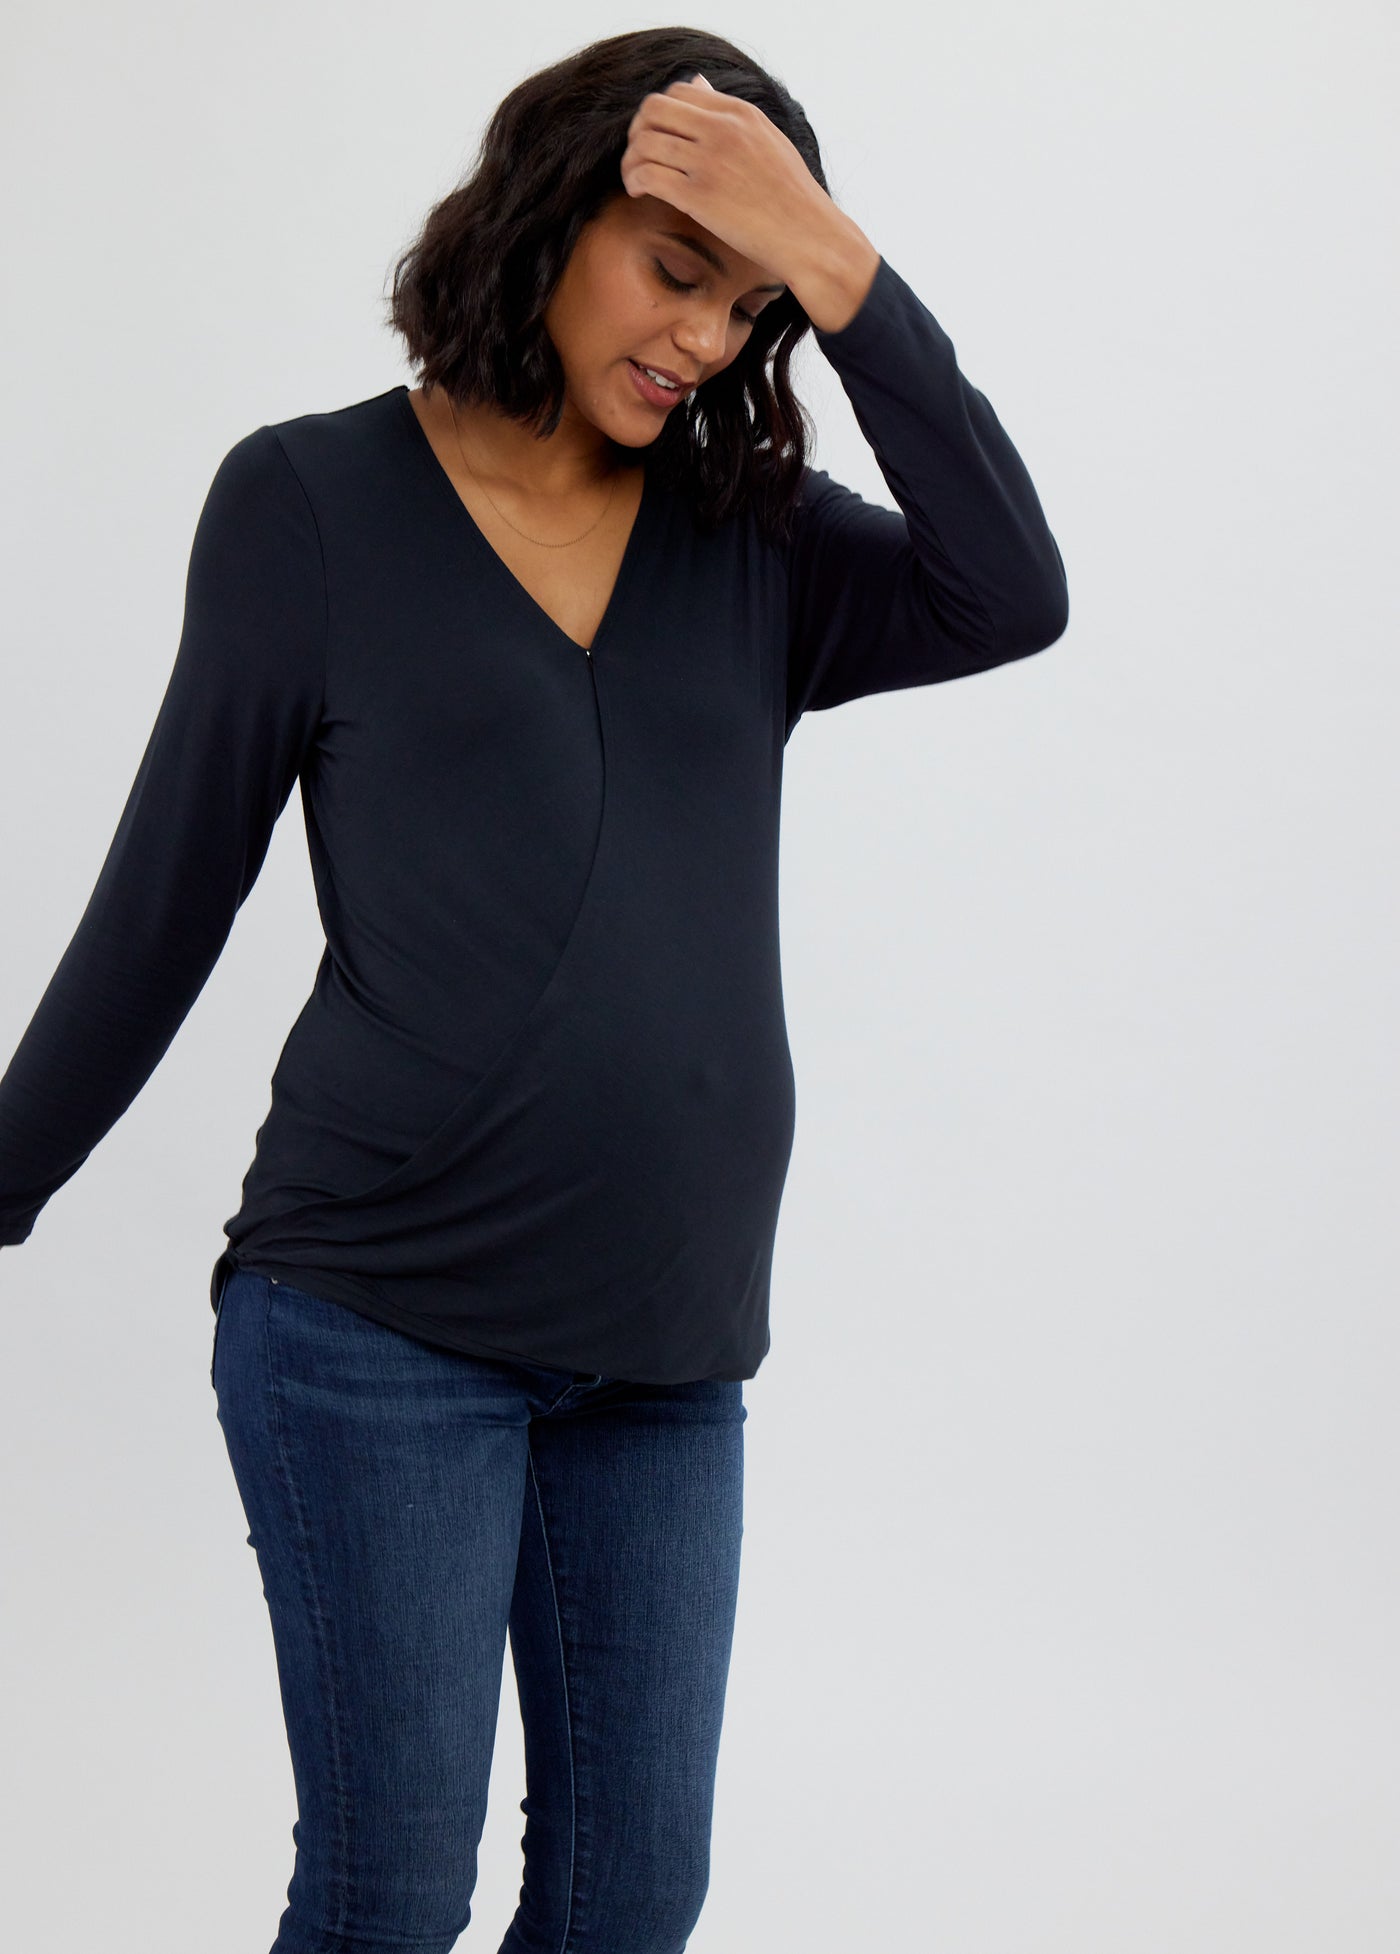 Elaine is 5’10", 34 weeks pregnant and wearing a size medium||Black